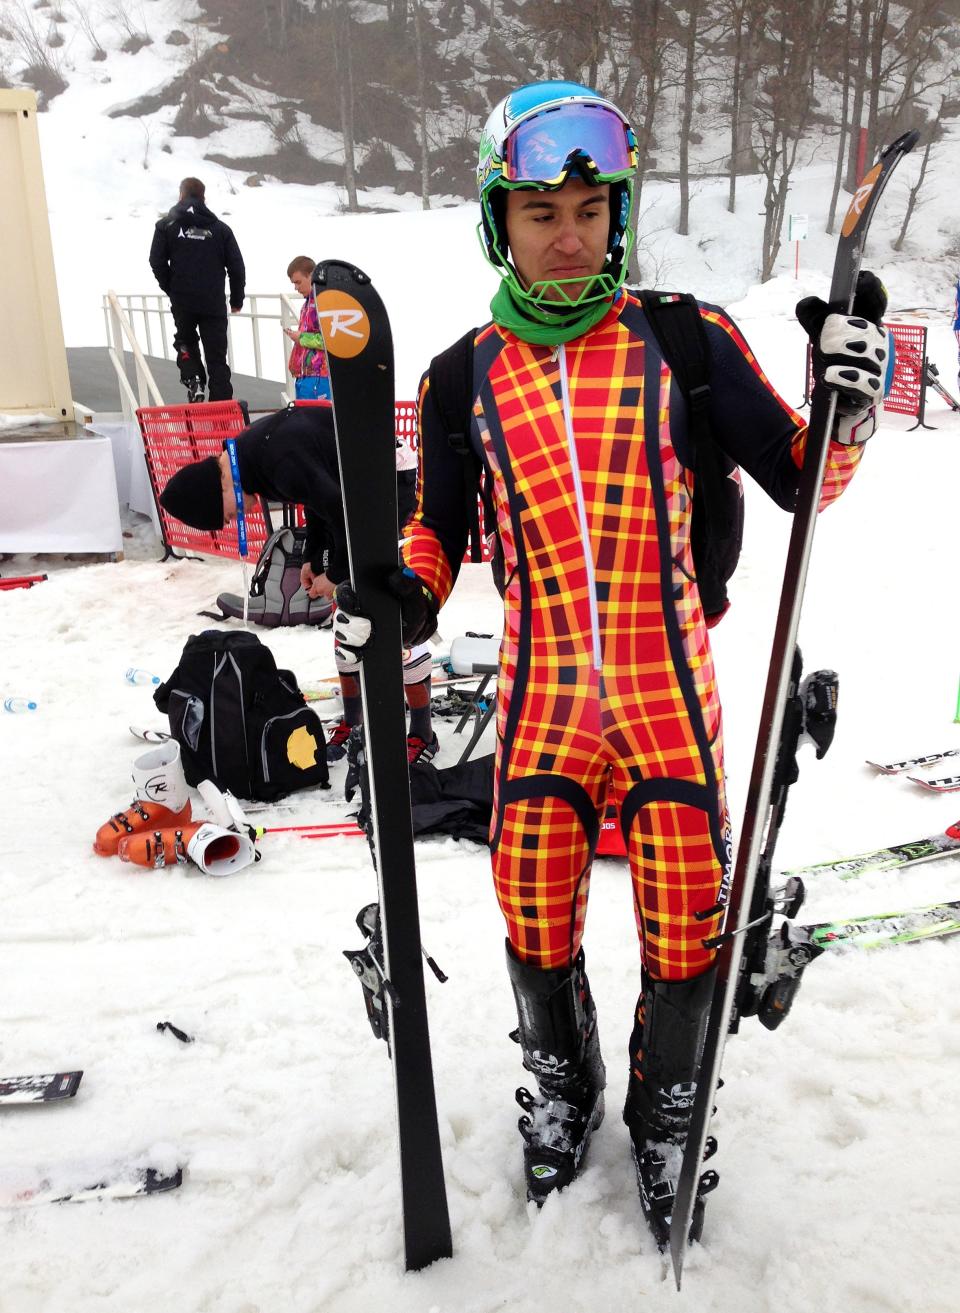 East Timor's Yohan Goncalves Goutt stands with his skis near the chairlift of the alpine skiing area at the Sochi 2014 Winter Olympics, Monday, Feb. 17, 2014, in Krasnaya Polyana, Russia. Goncalves Goutt, 19, is preparing to compete as an Alpine skier in the Sochi Games, representing East Timor, whose officially recognized ski federation he founded. His race, the slalom, is Saturday night. (AP Photo/Andrew Dampf)